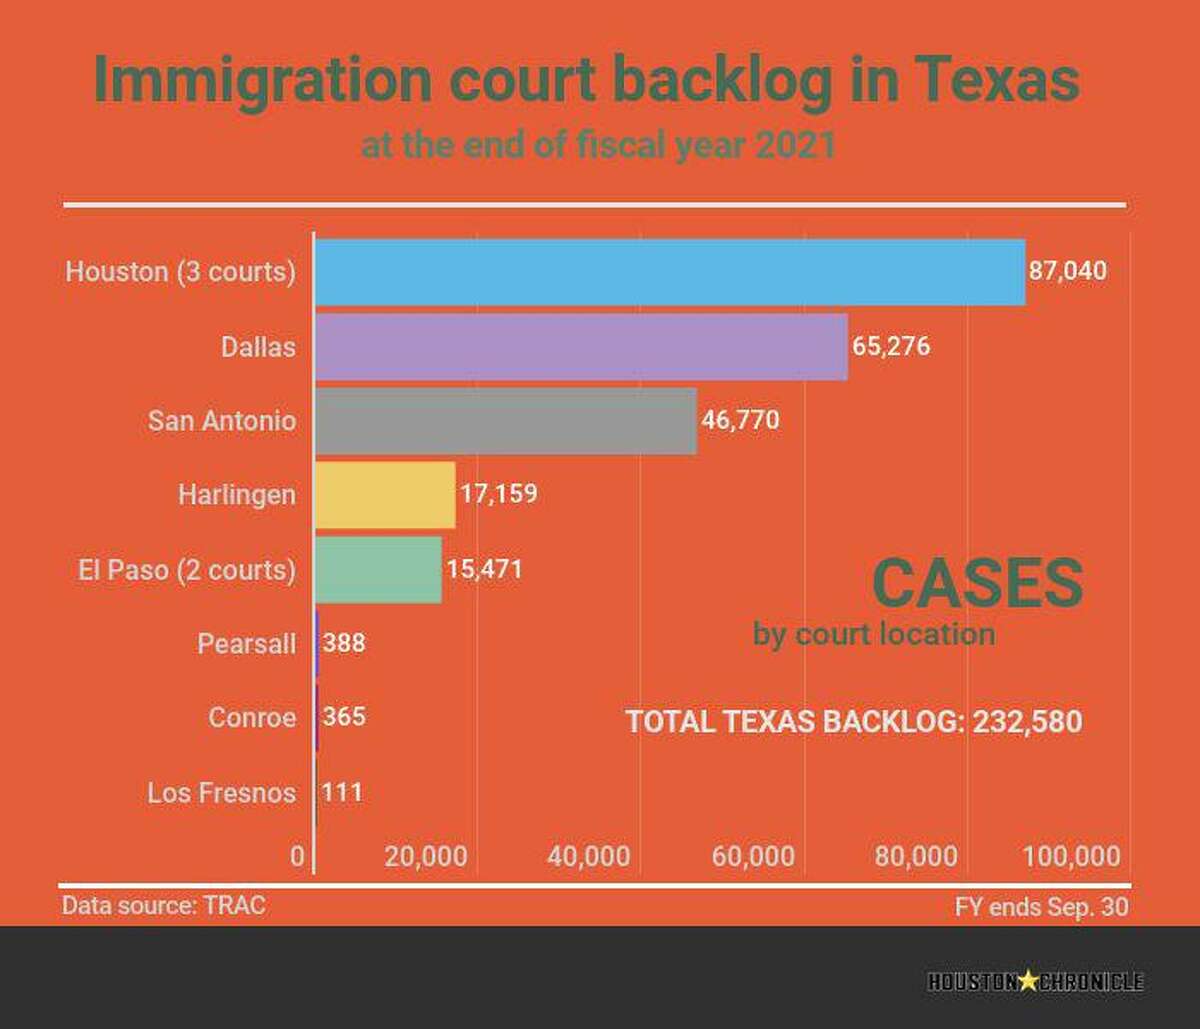 Immigration court backlog in Texas by court location.